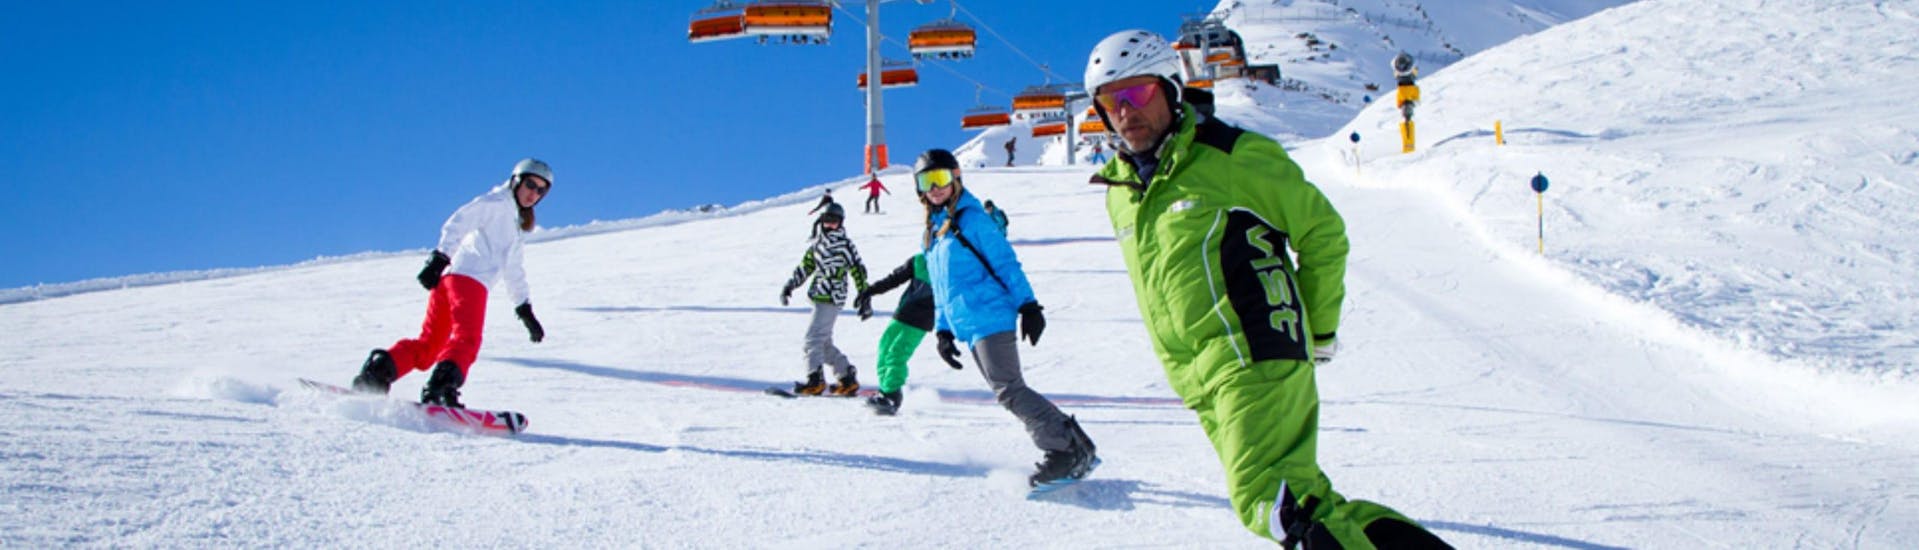 A group of people is learning to snowboard during their Private Snowboarding Lessons for Kids & Adults with the ski school Ski- und Bikeschule Ötztal Sölden.